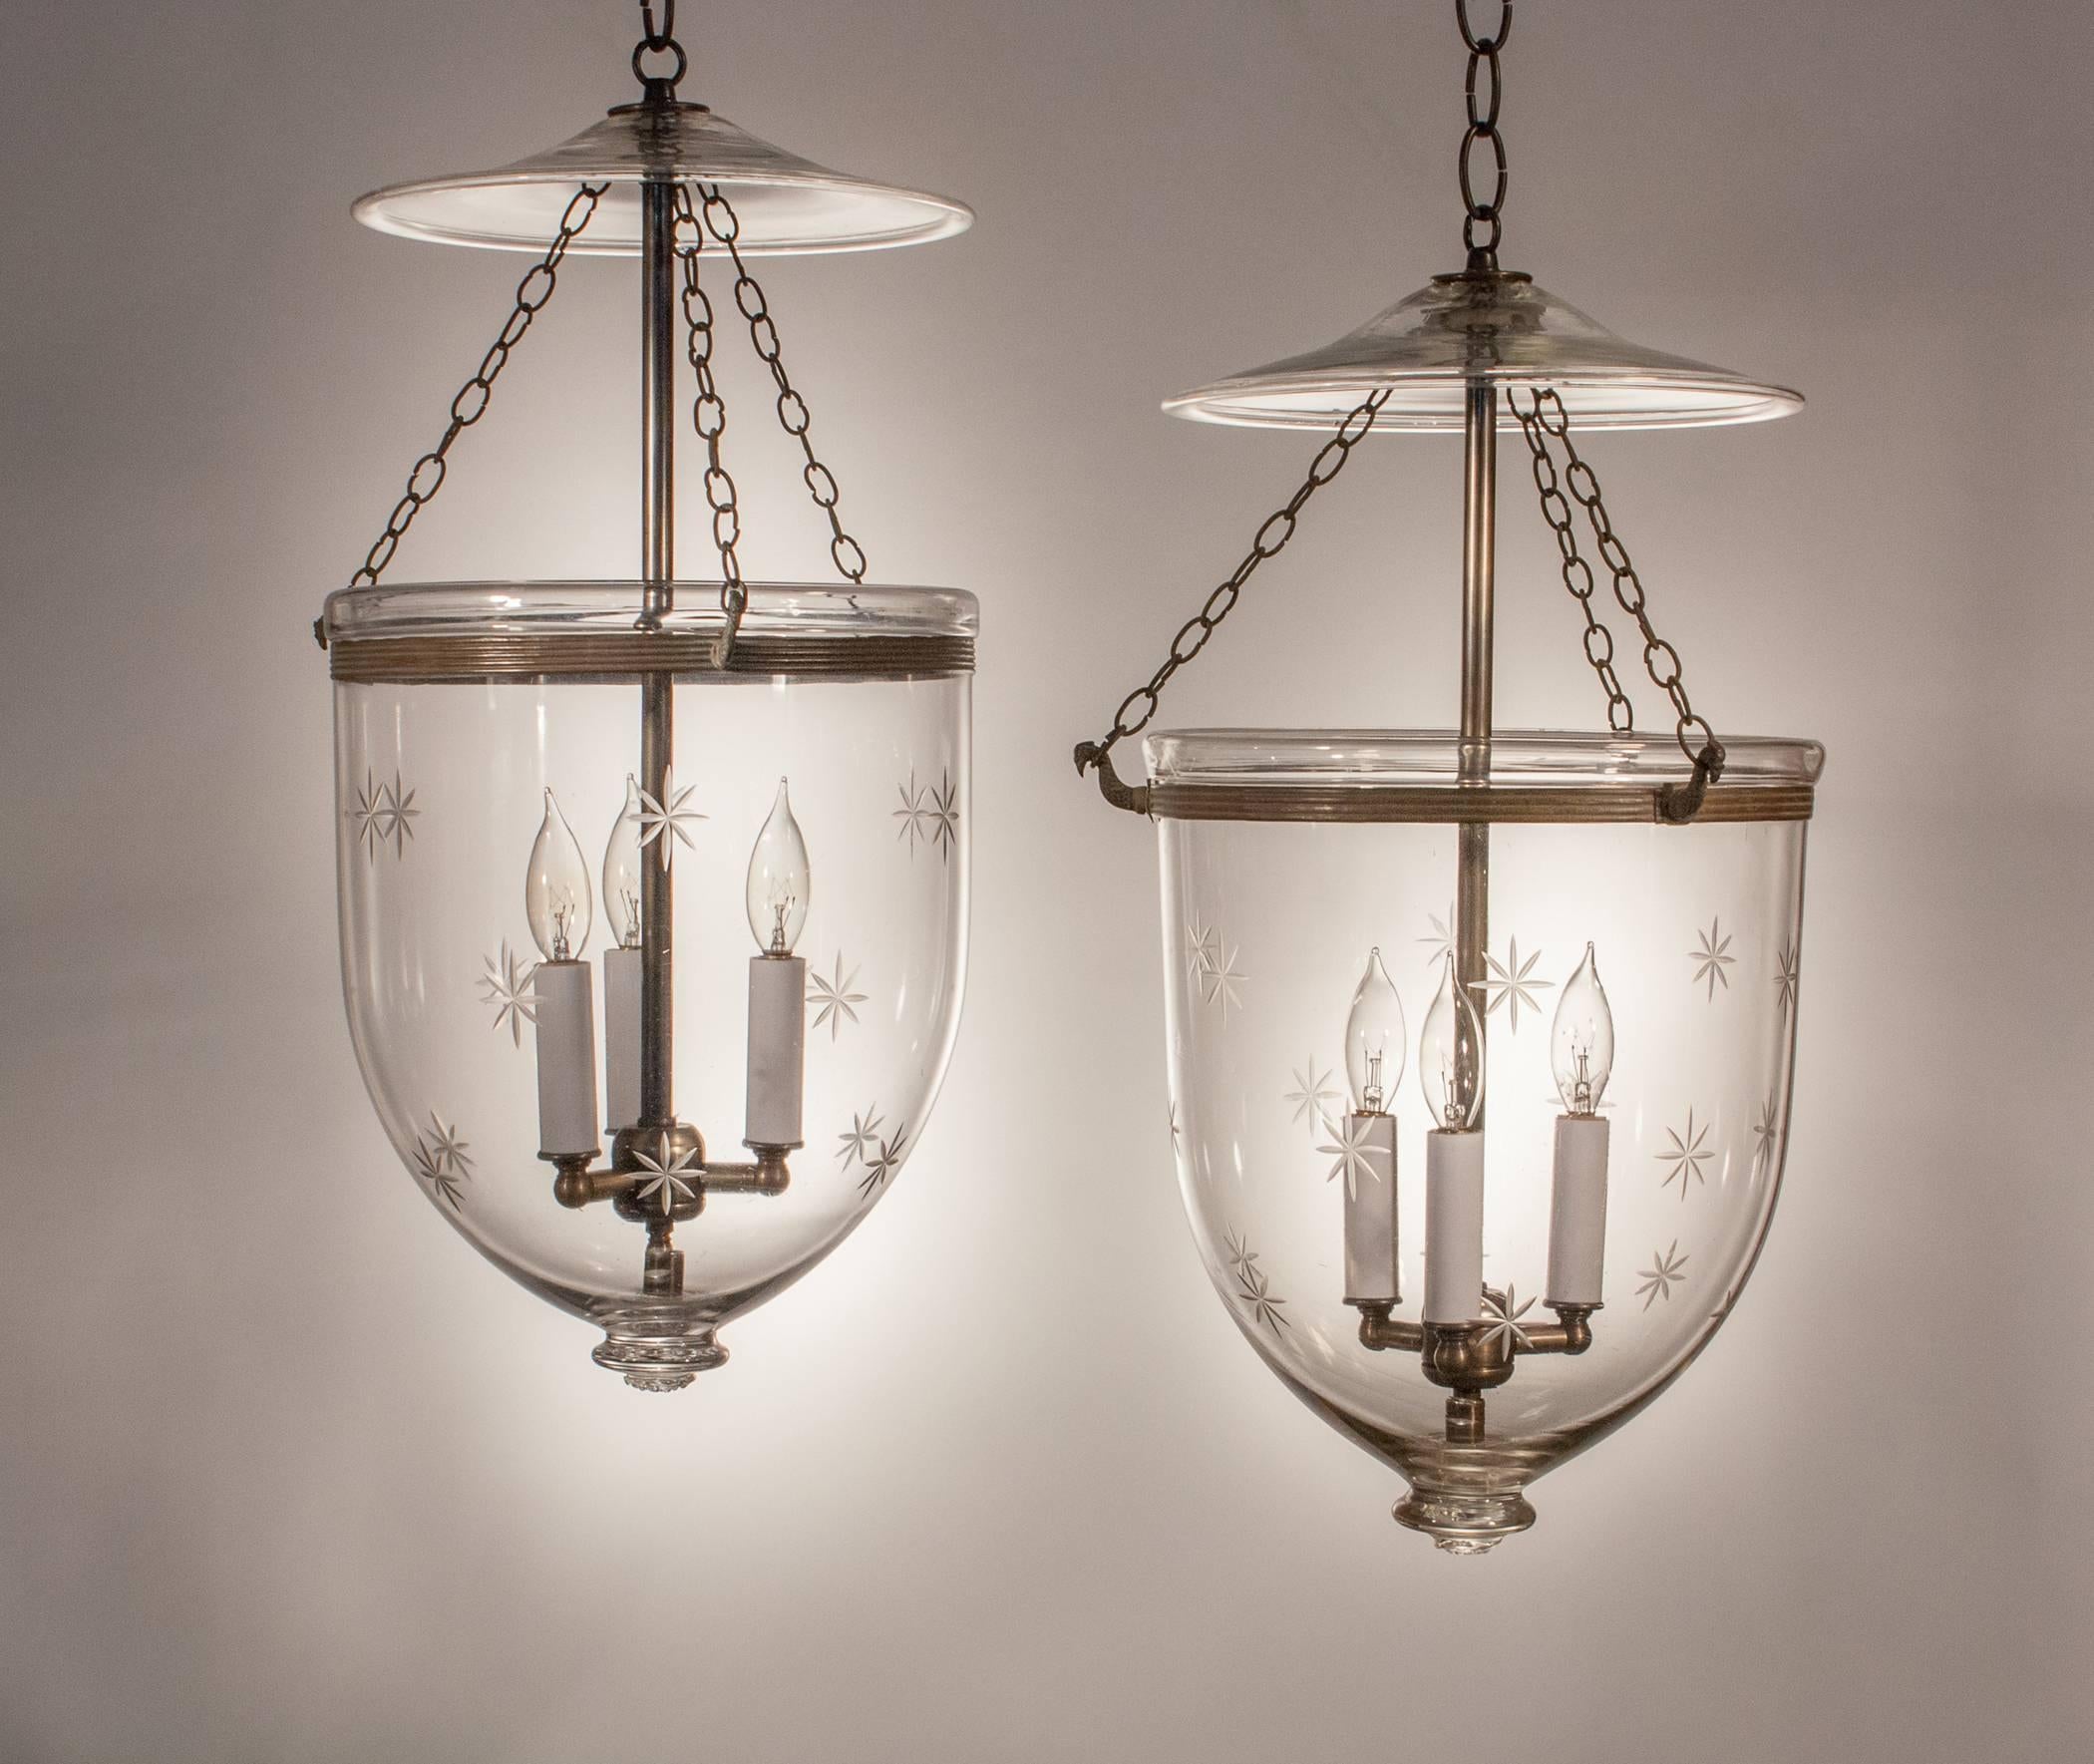 A wonderful pair of 19th century bell jar lanterns from England with authentic rolled brass bands and chains. These medium-sized hall lanterns are full in form and feature fine quality handblown glass, including desirable swirls and air bubbles. In